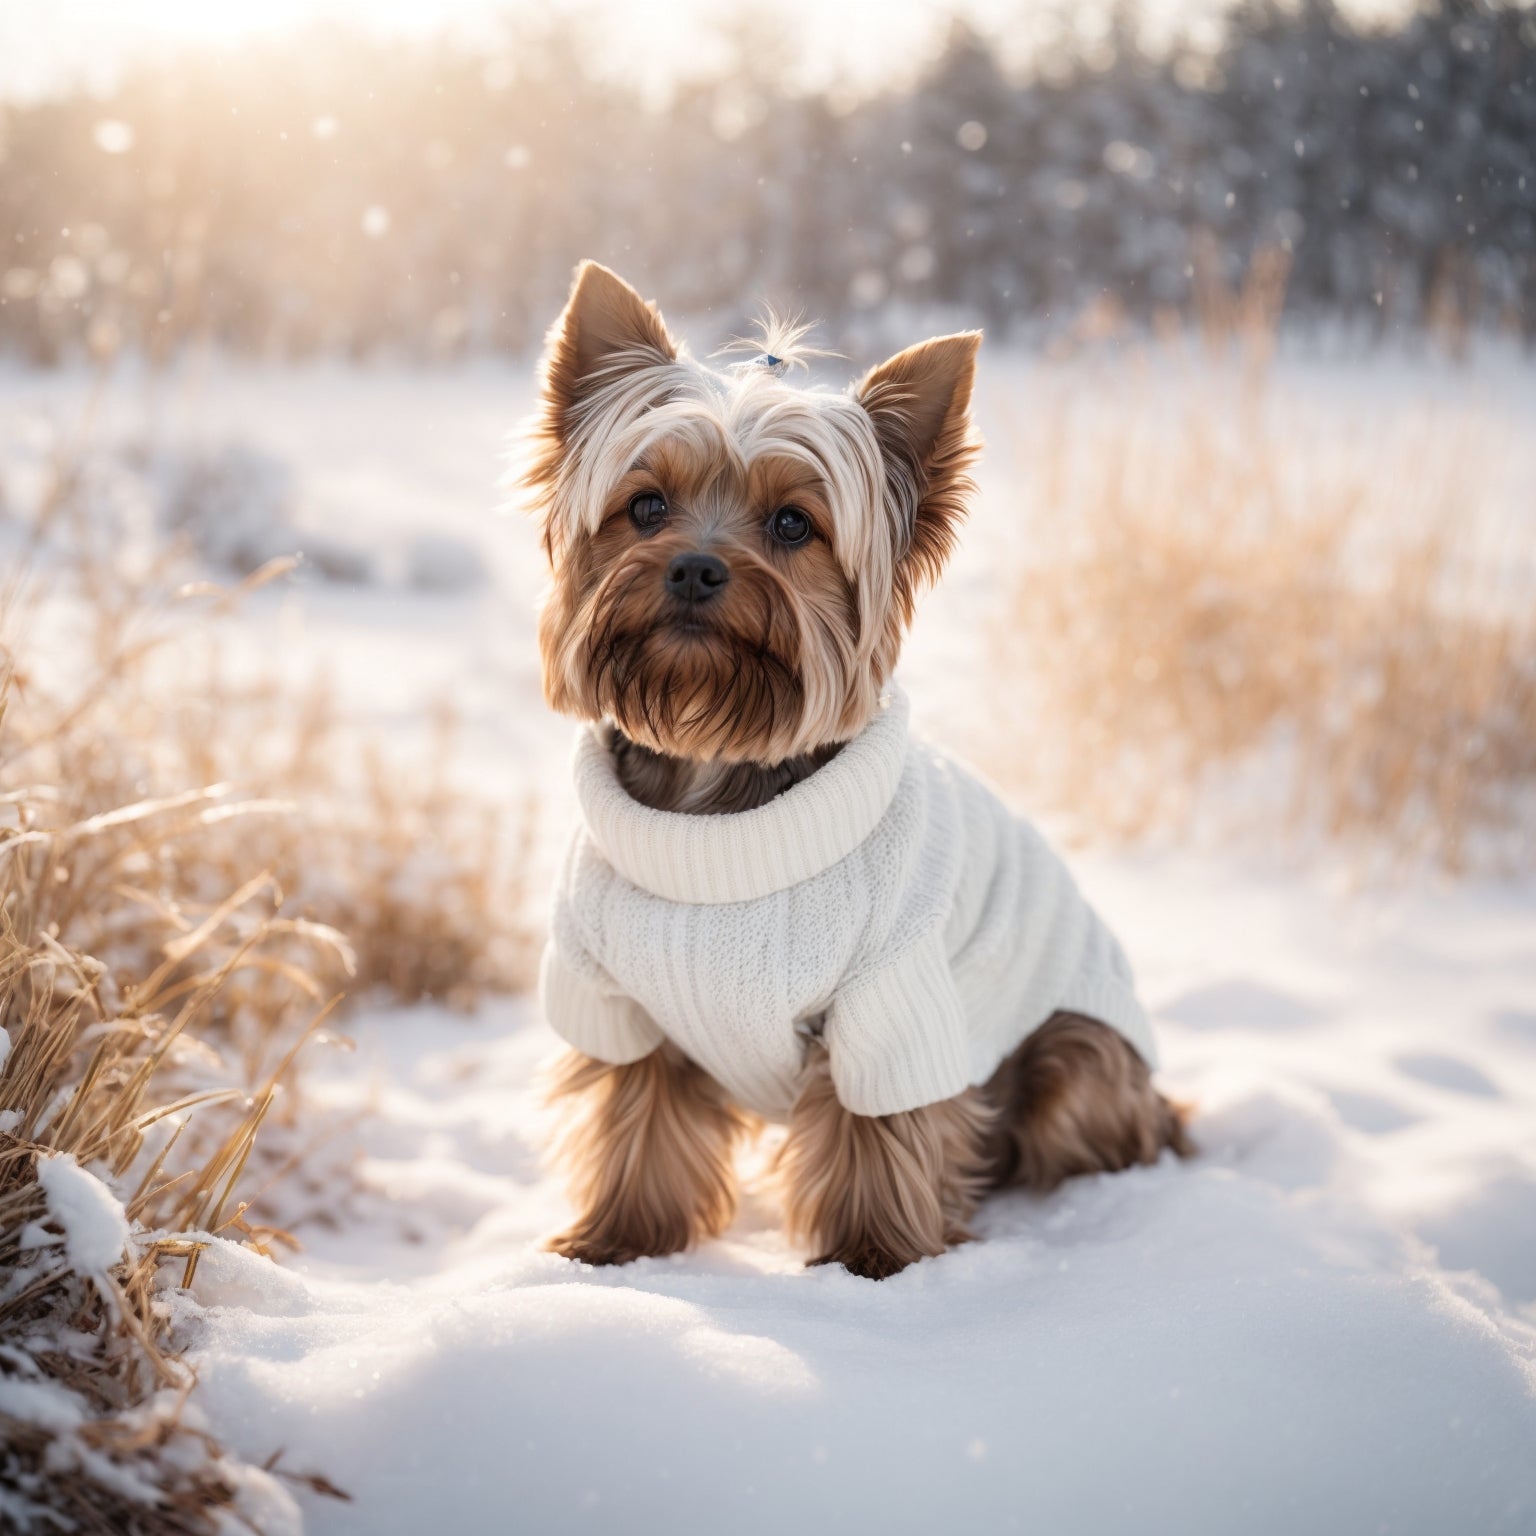 How to keep your dog warm outside